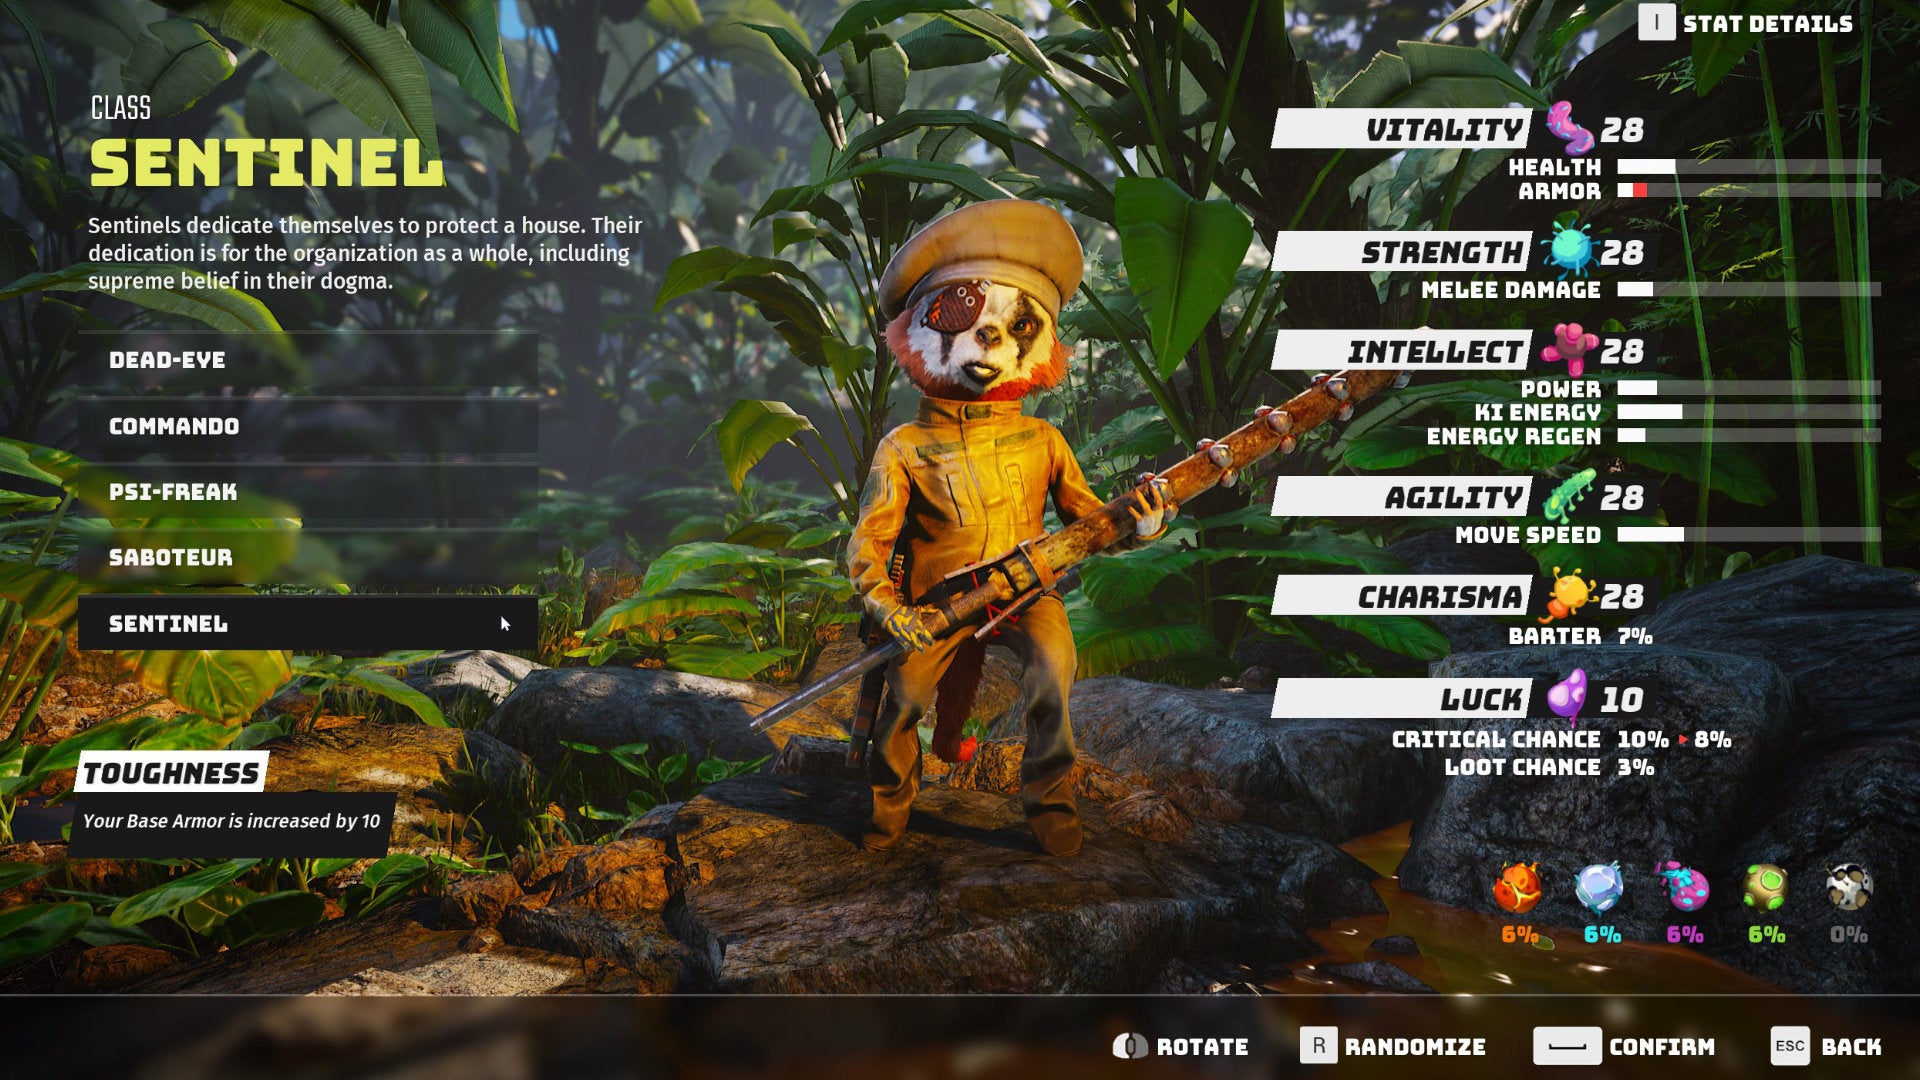 A Biomutant screenshot of the character creation and class selection screen, with the Sentinel class selected.